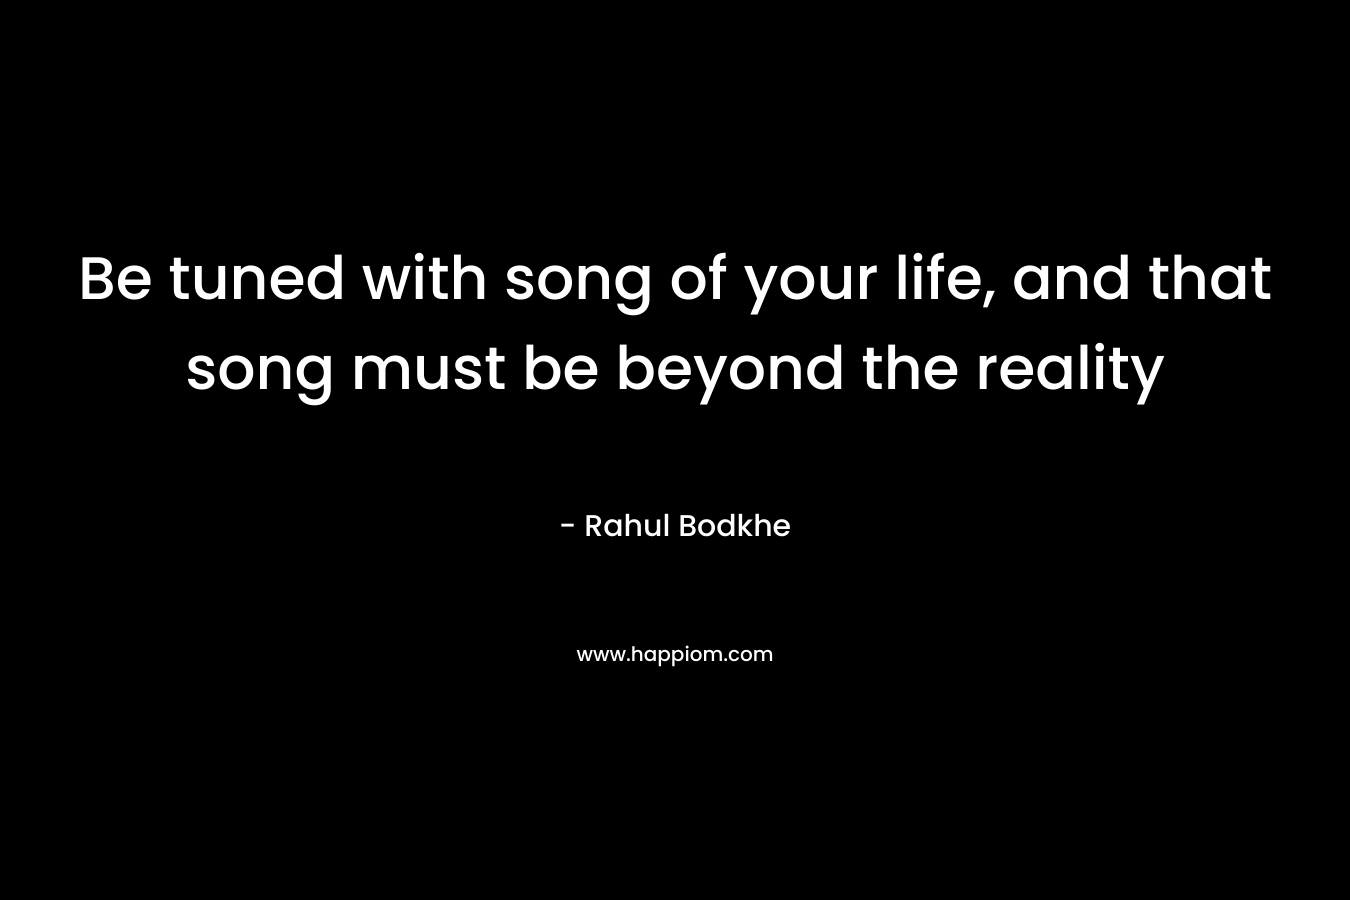 Be tuned with song of your life, and that song must be beyond the reality – Rahul Bodkhe